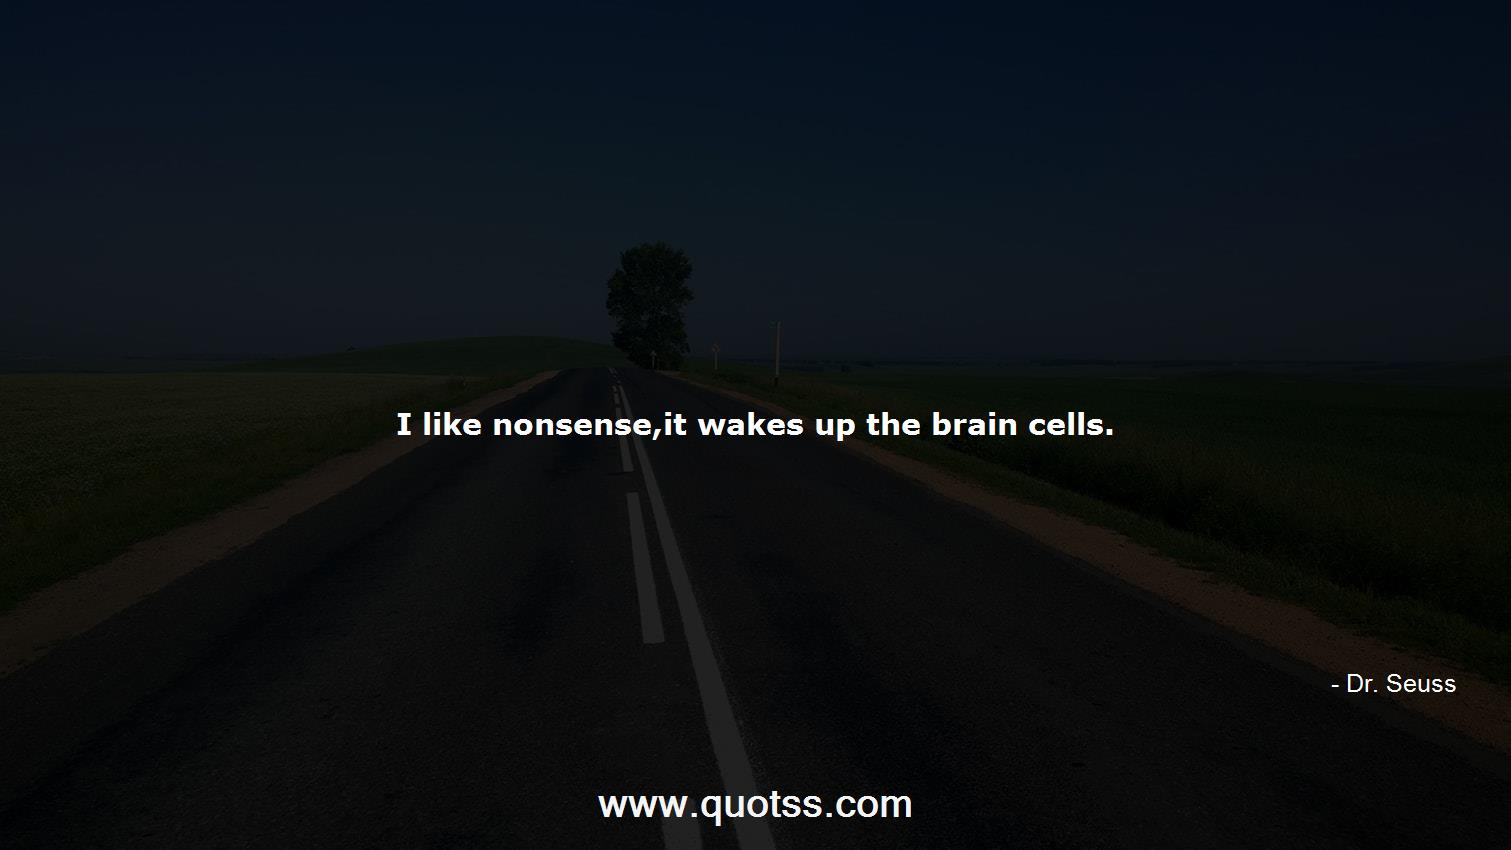 Dr. Seuss Quote on Quotss